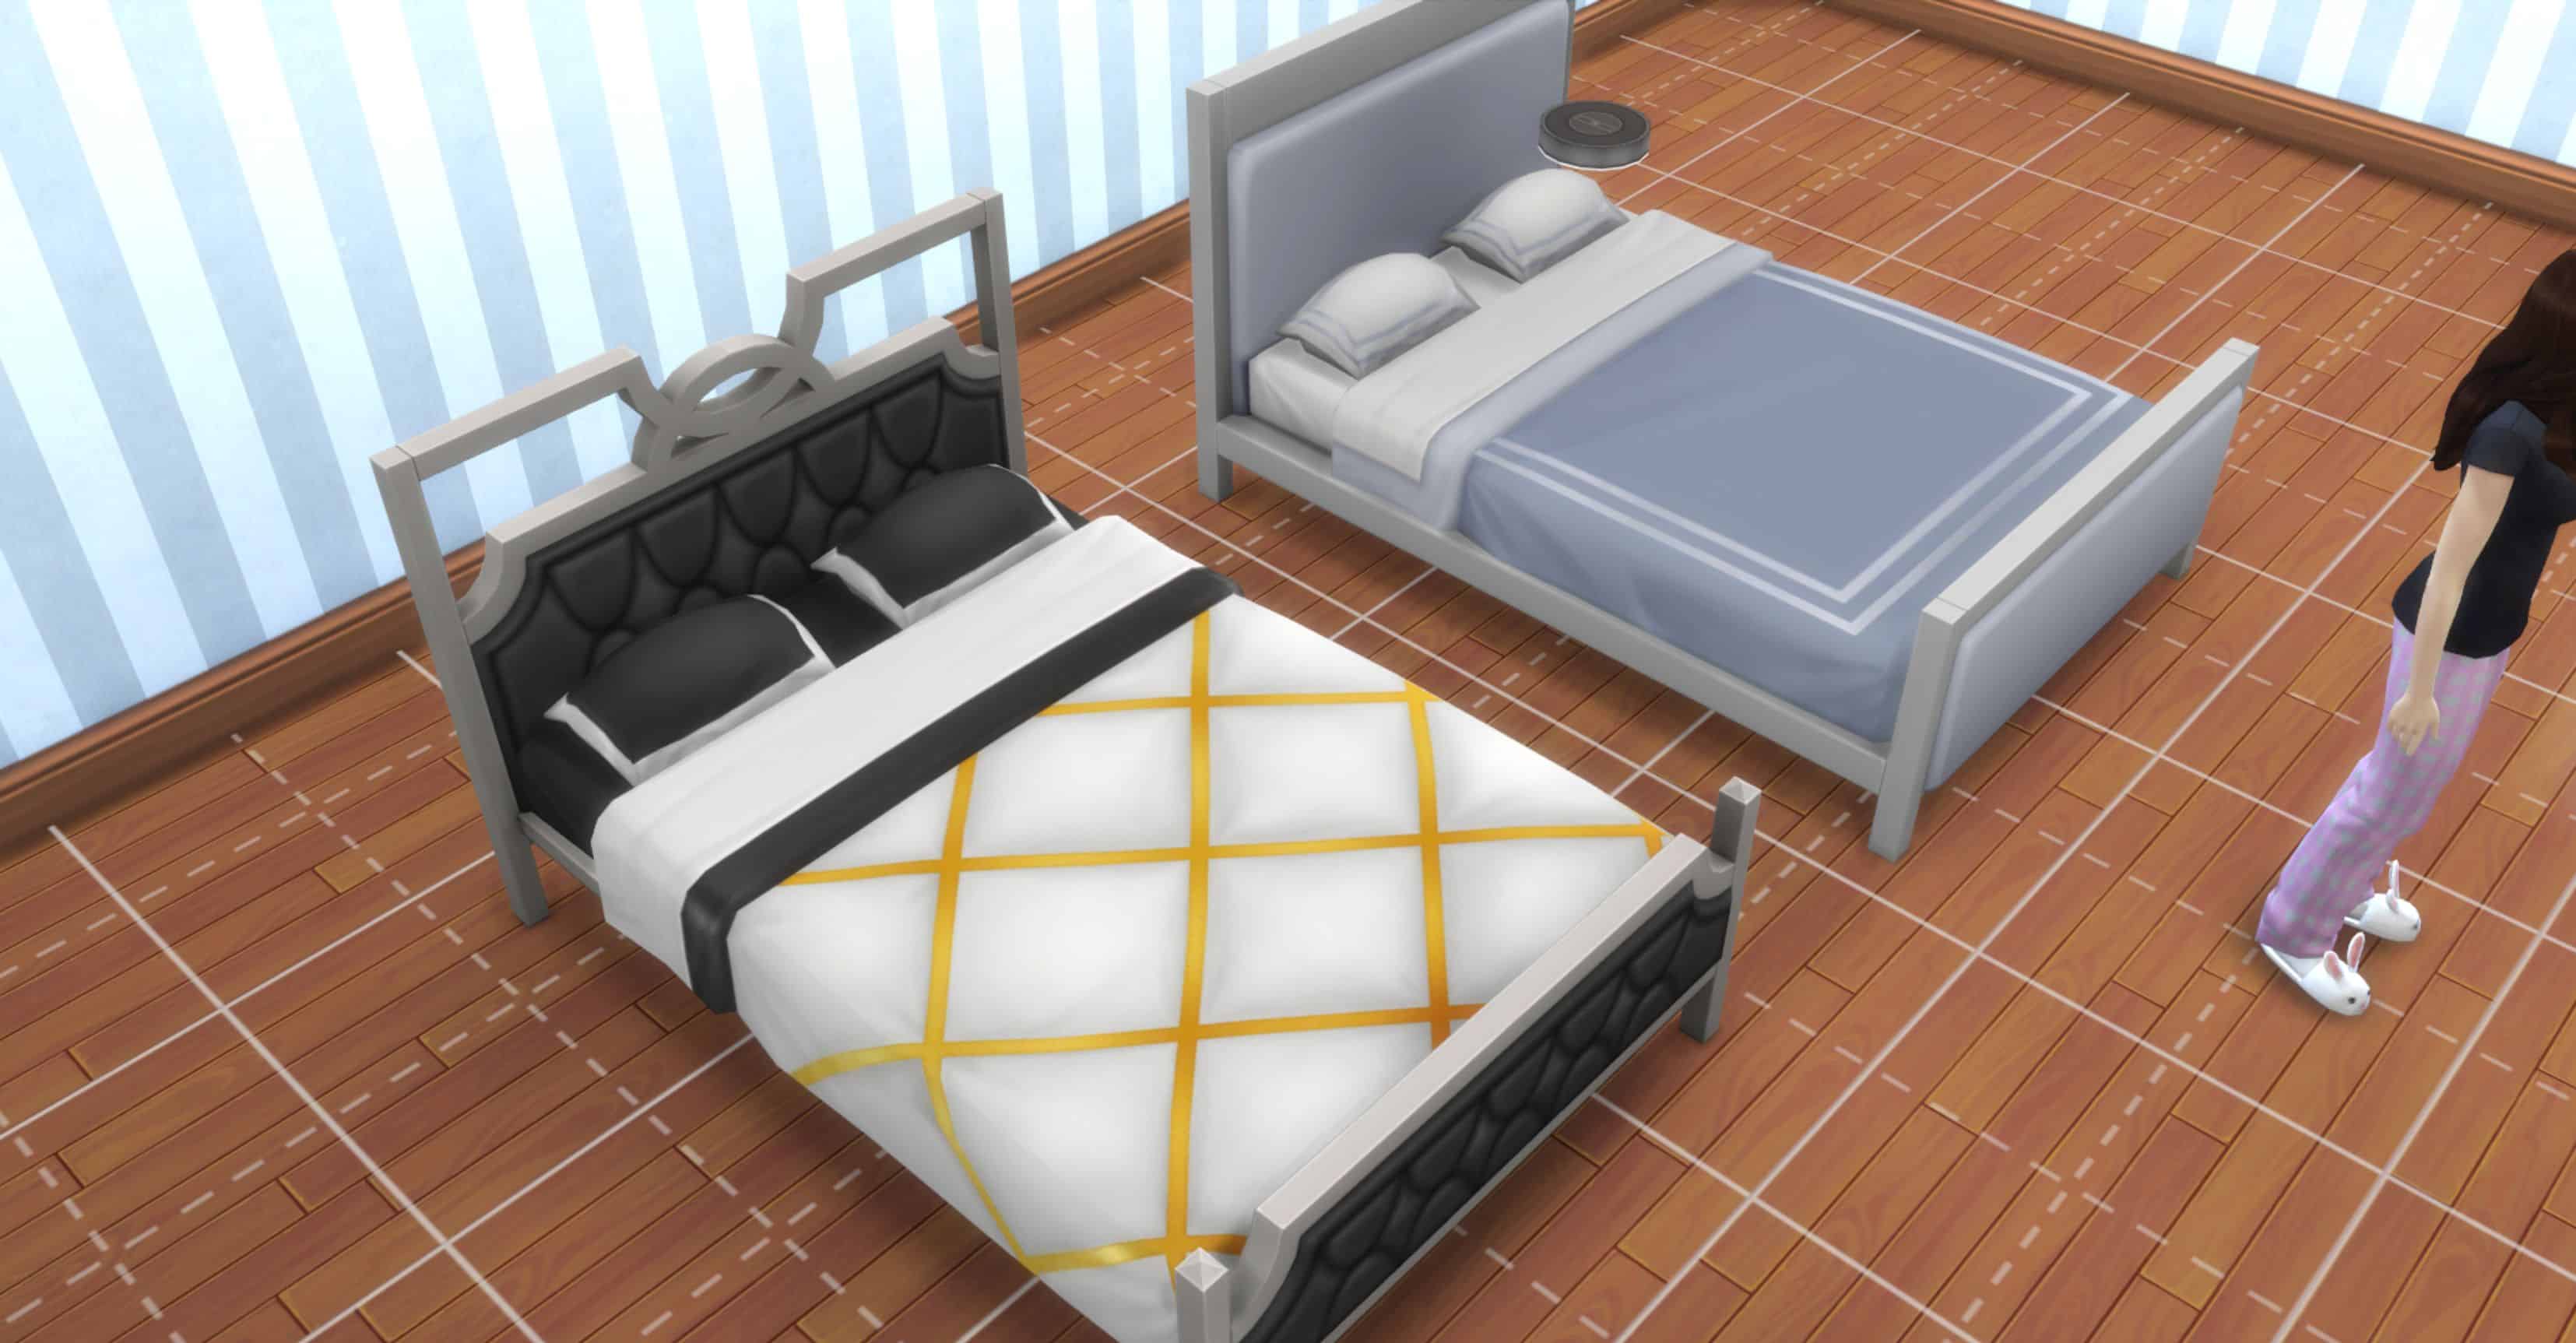 Sims 4 objects mods